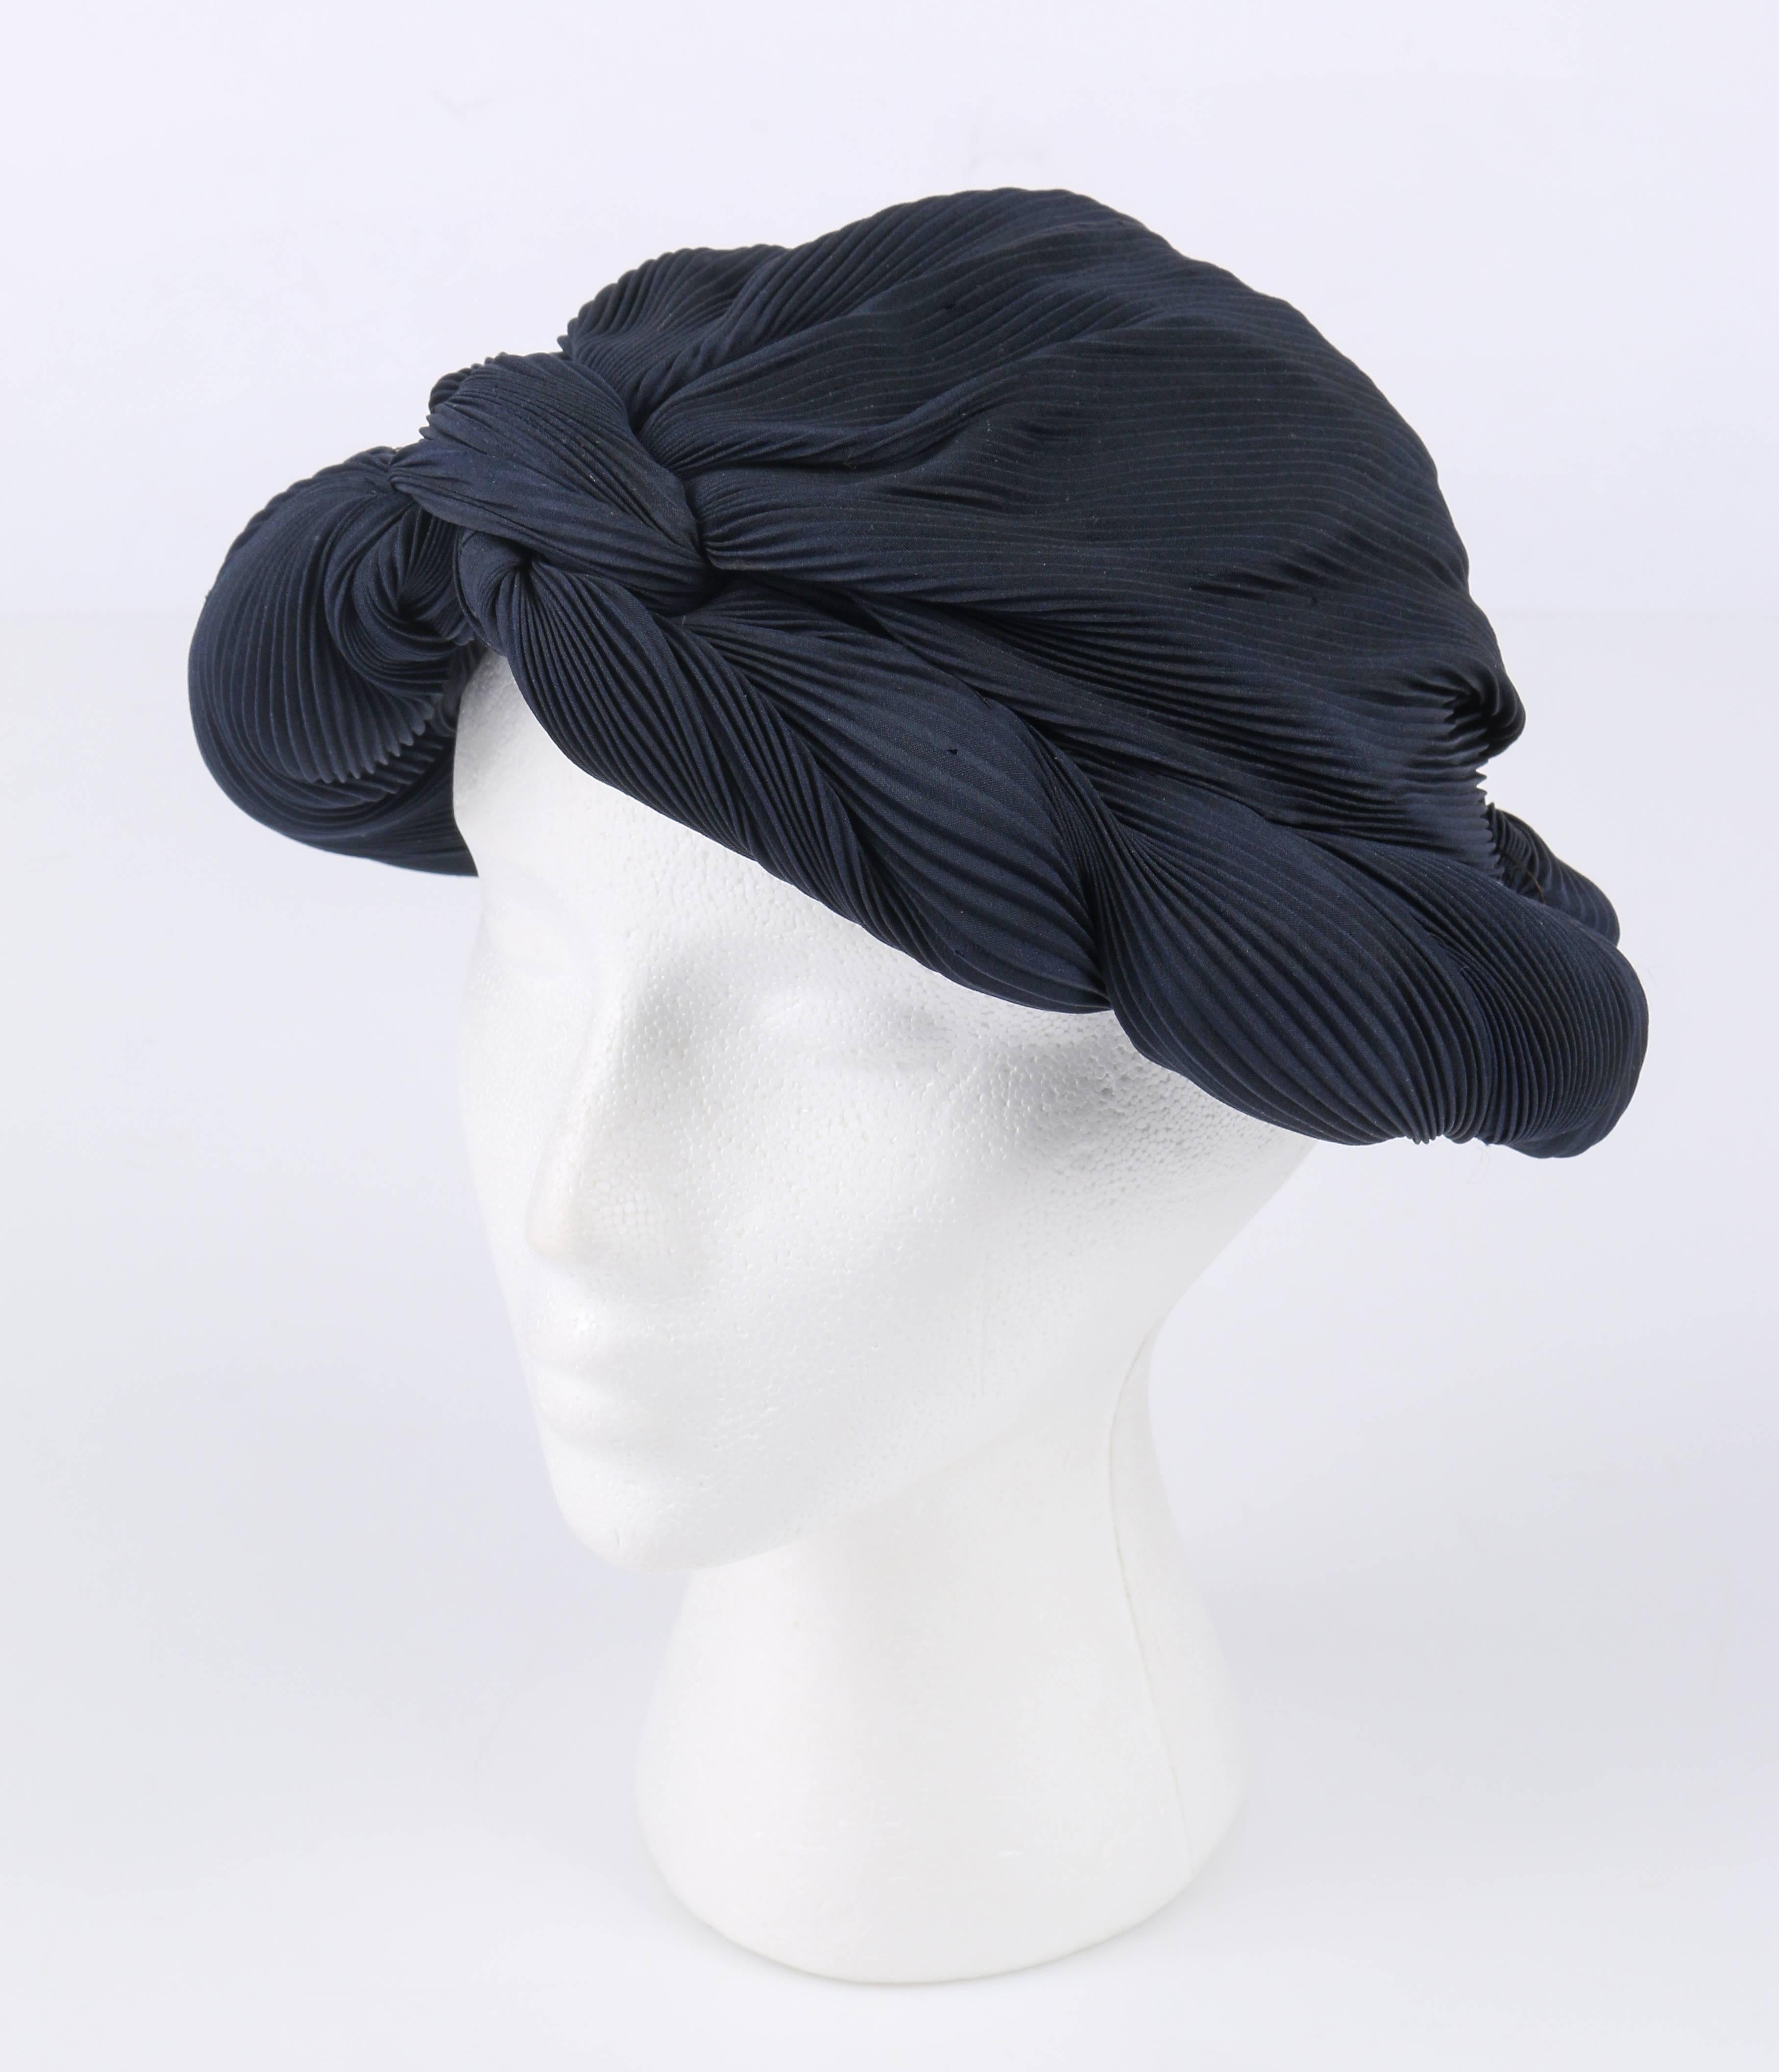 Vintage c.1930's midnight navy blue / black pleated silk turban style dinner hat. Plisse pleated silk body. Gather twisted pleat floppy brim comes to a center knot at forehead. Black silk lined and grosgrain ribbon interior rim. Almost identical